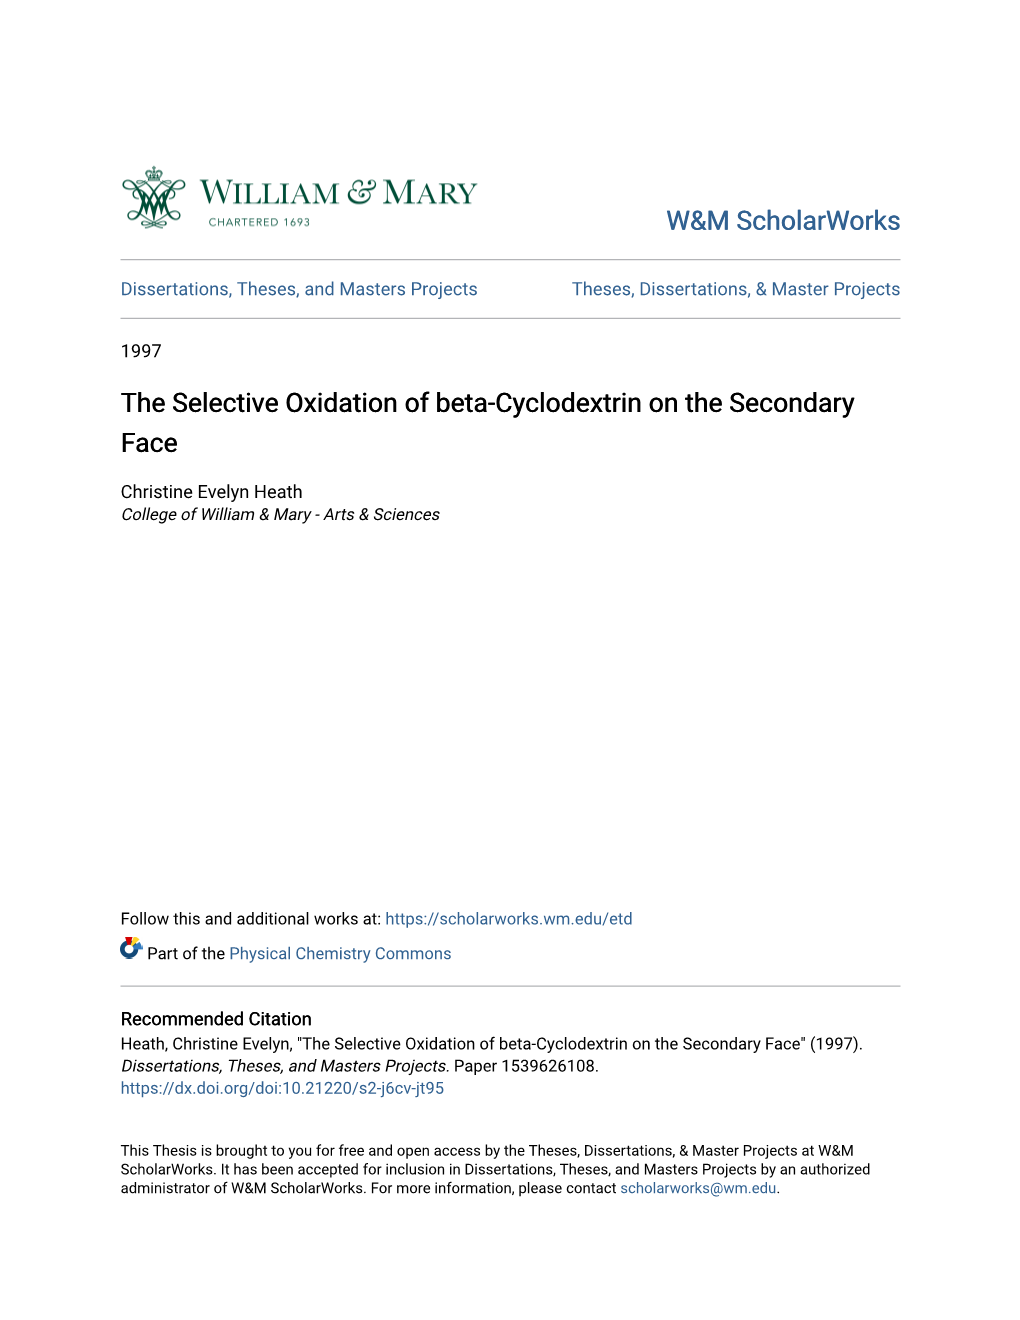 The Selective Oxidation of Beta-Cyclodextrin on the Secondary Face